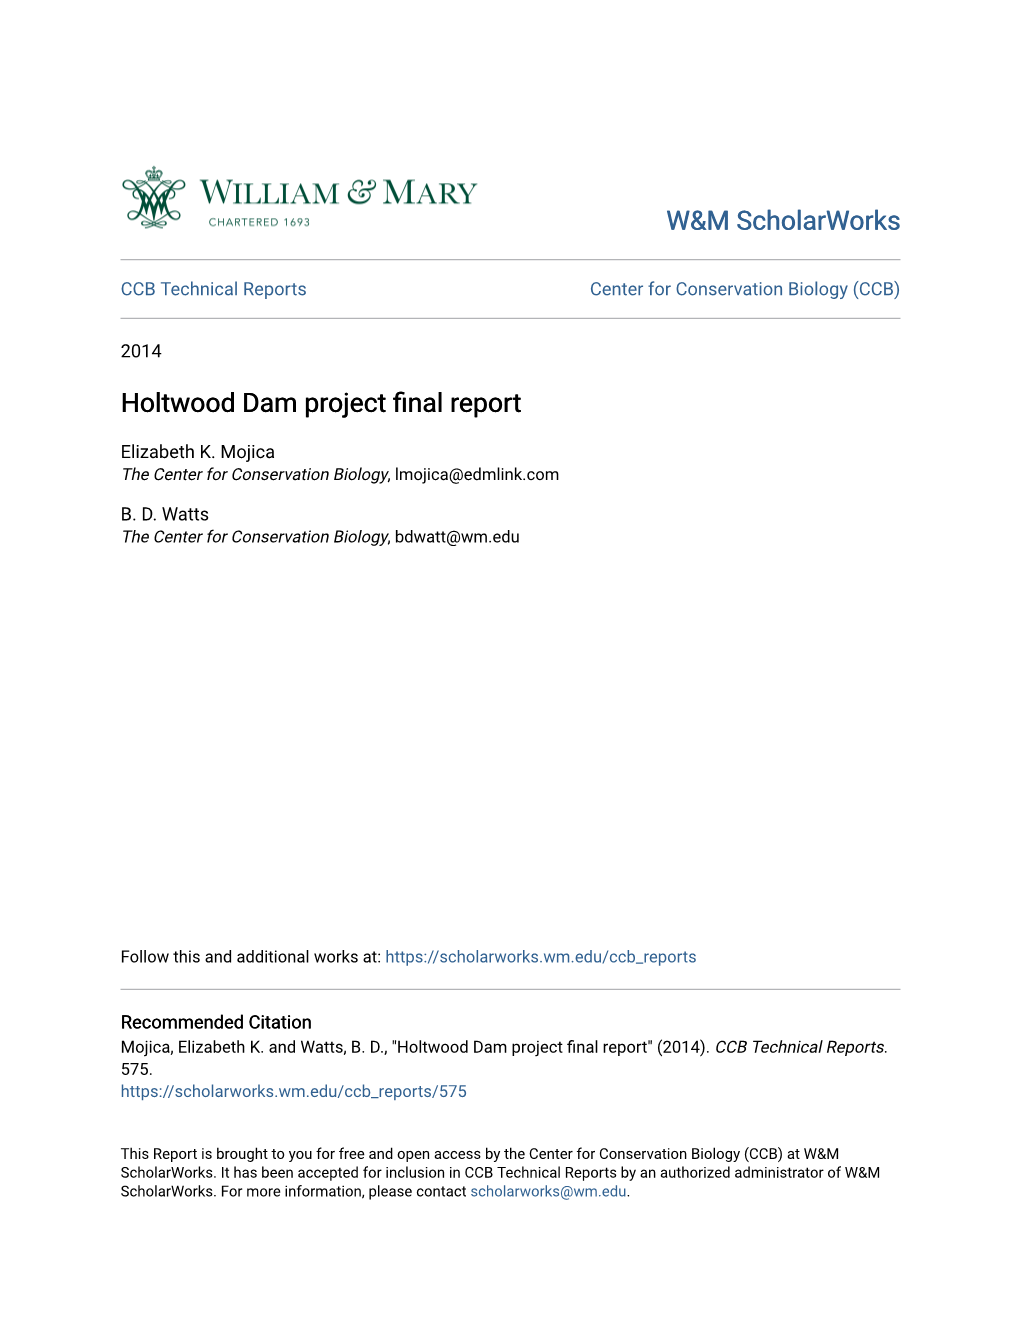 Holtwood Dam Project Final Report